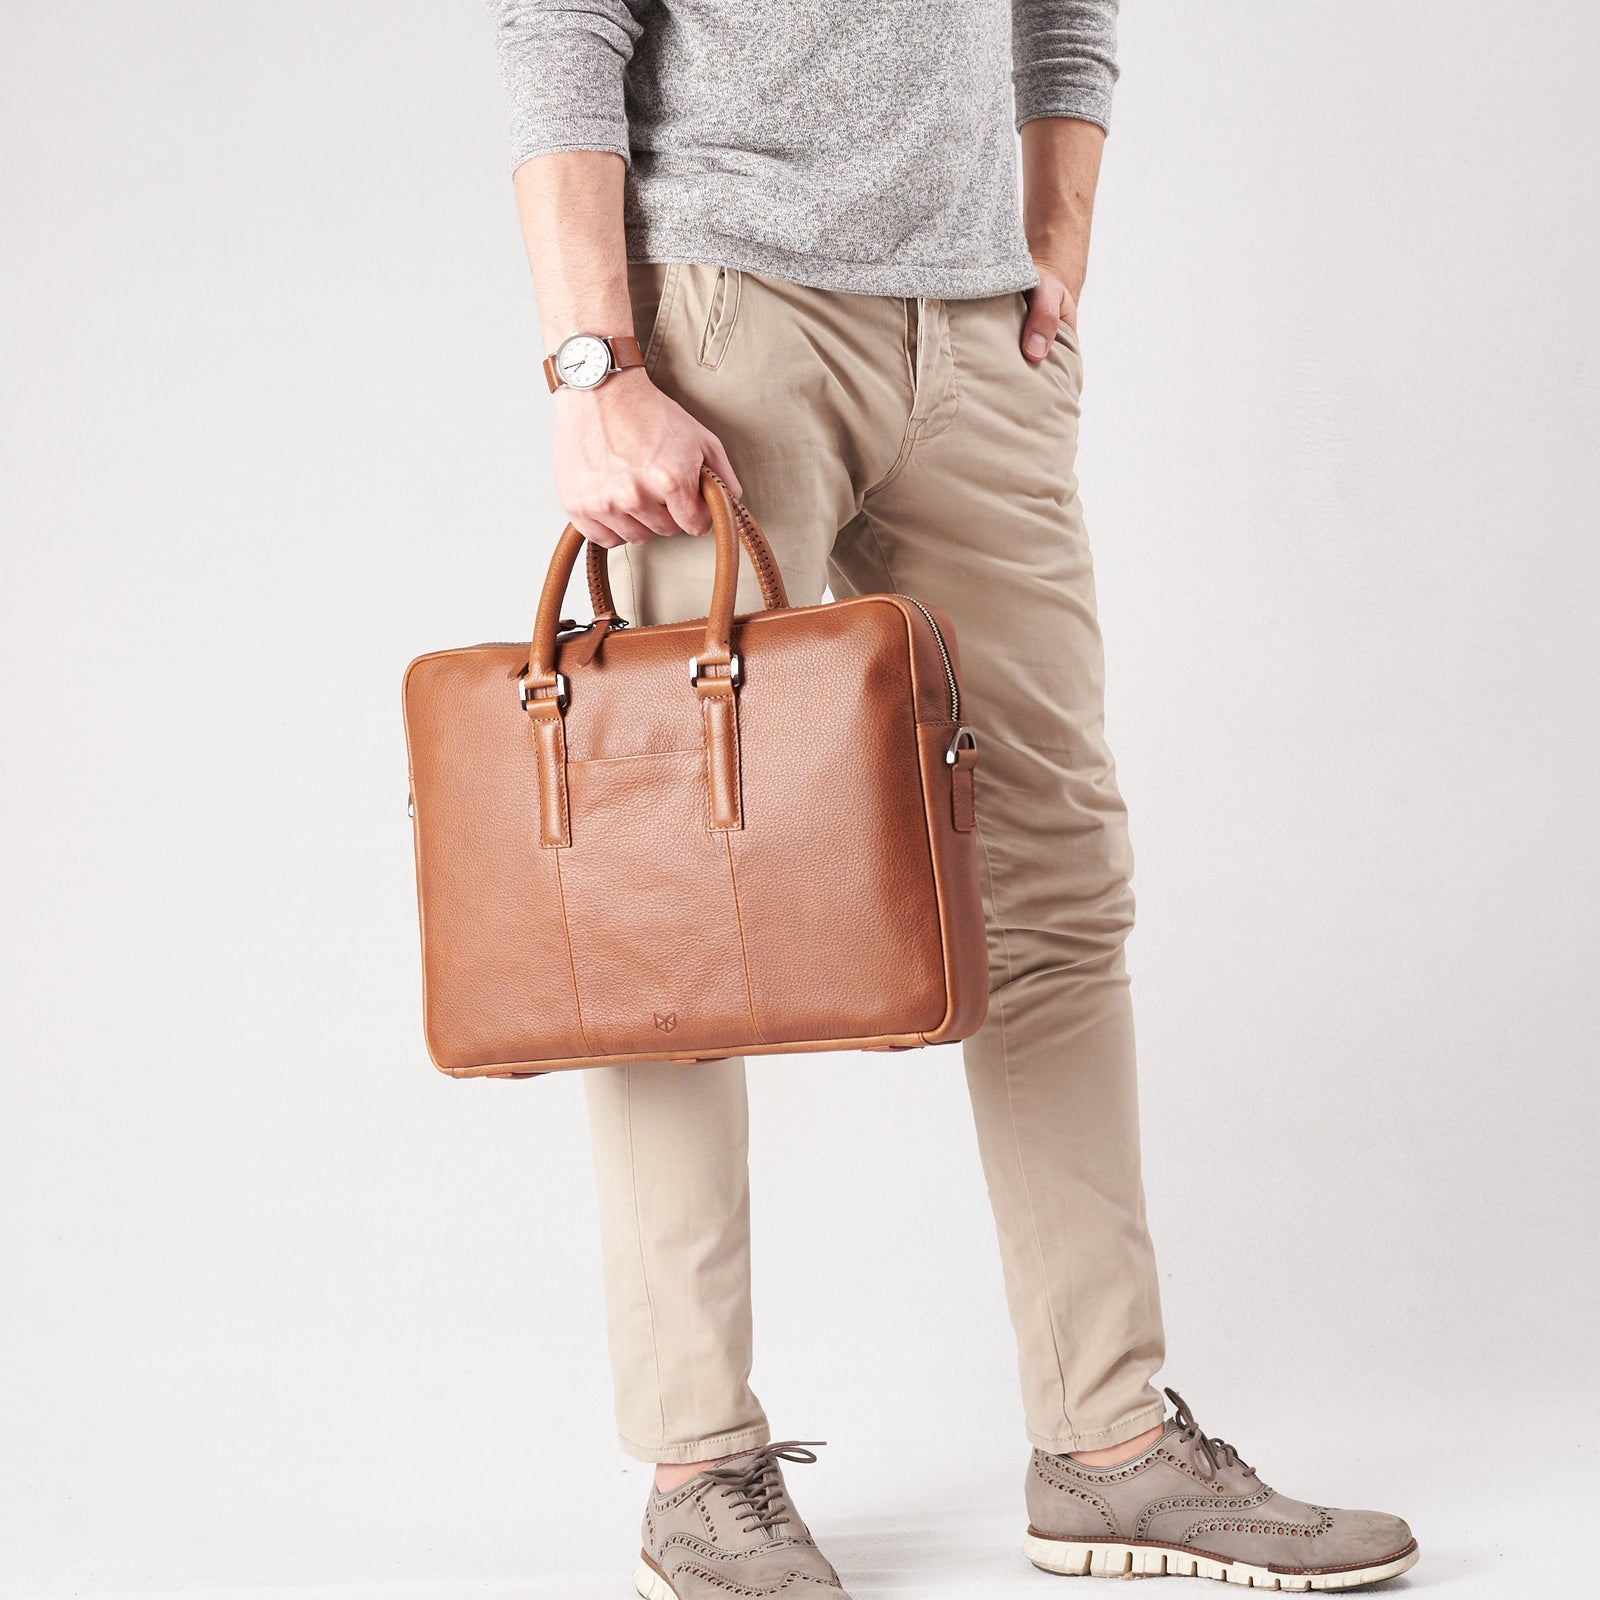 Holding business briefcase. Tan leather briefcase laptop bag for men. Gazeli laptop briefcase by Capra Leather.